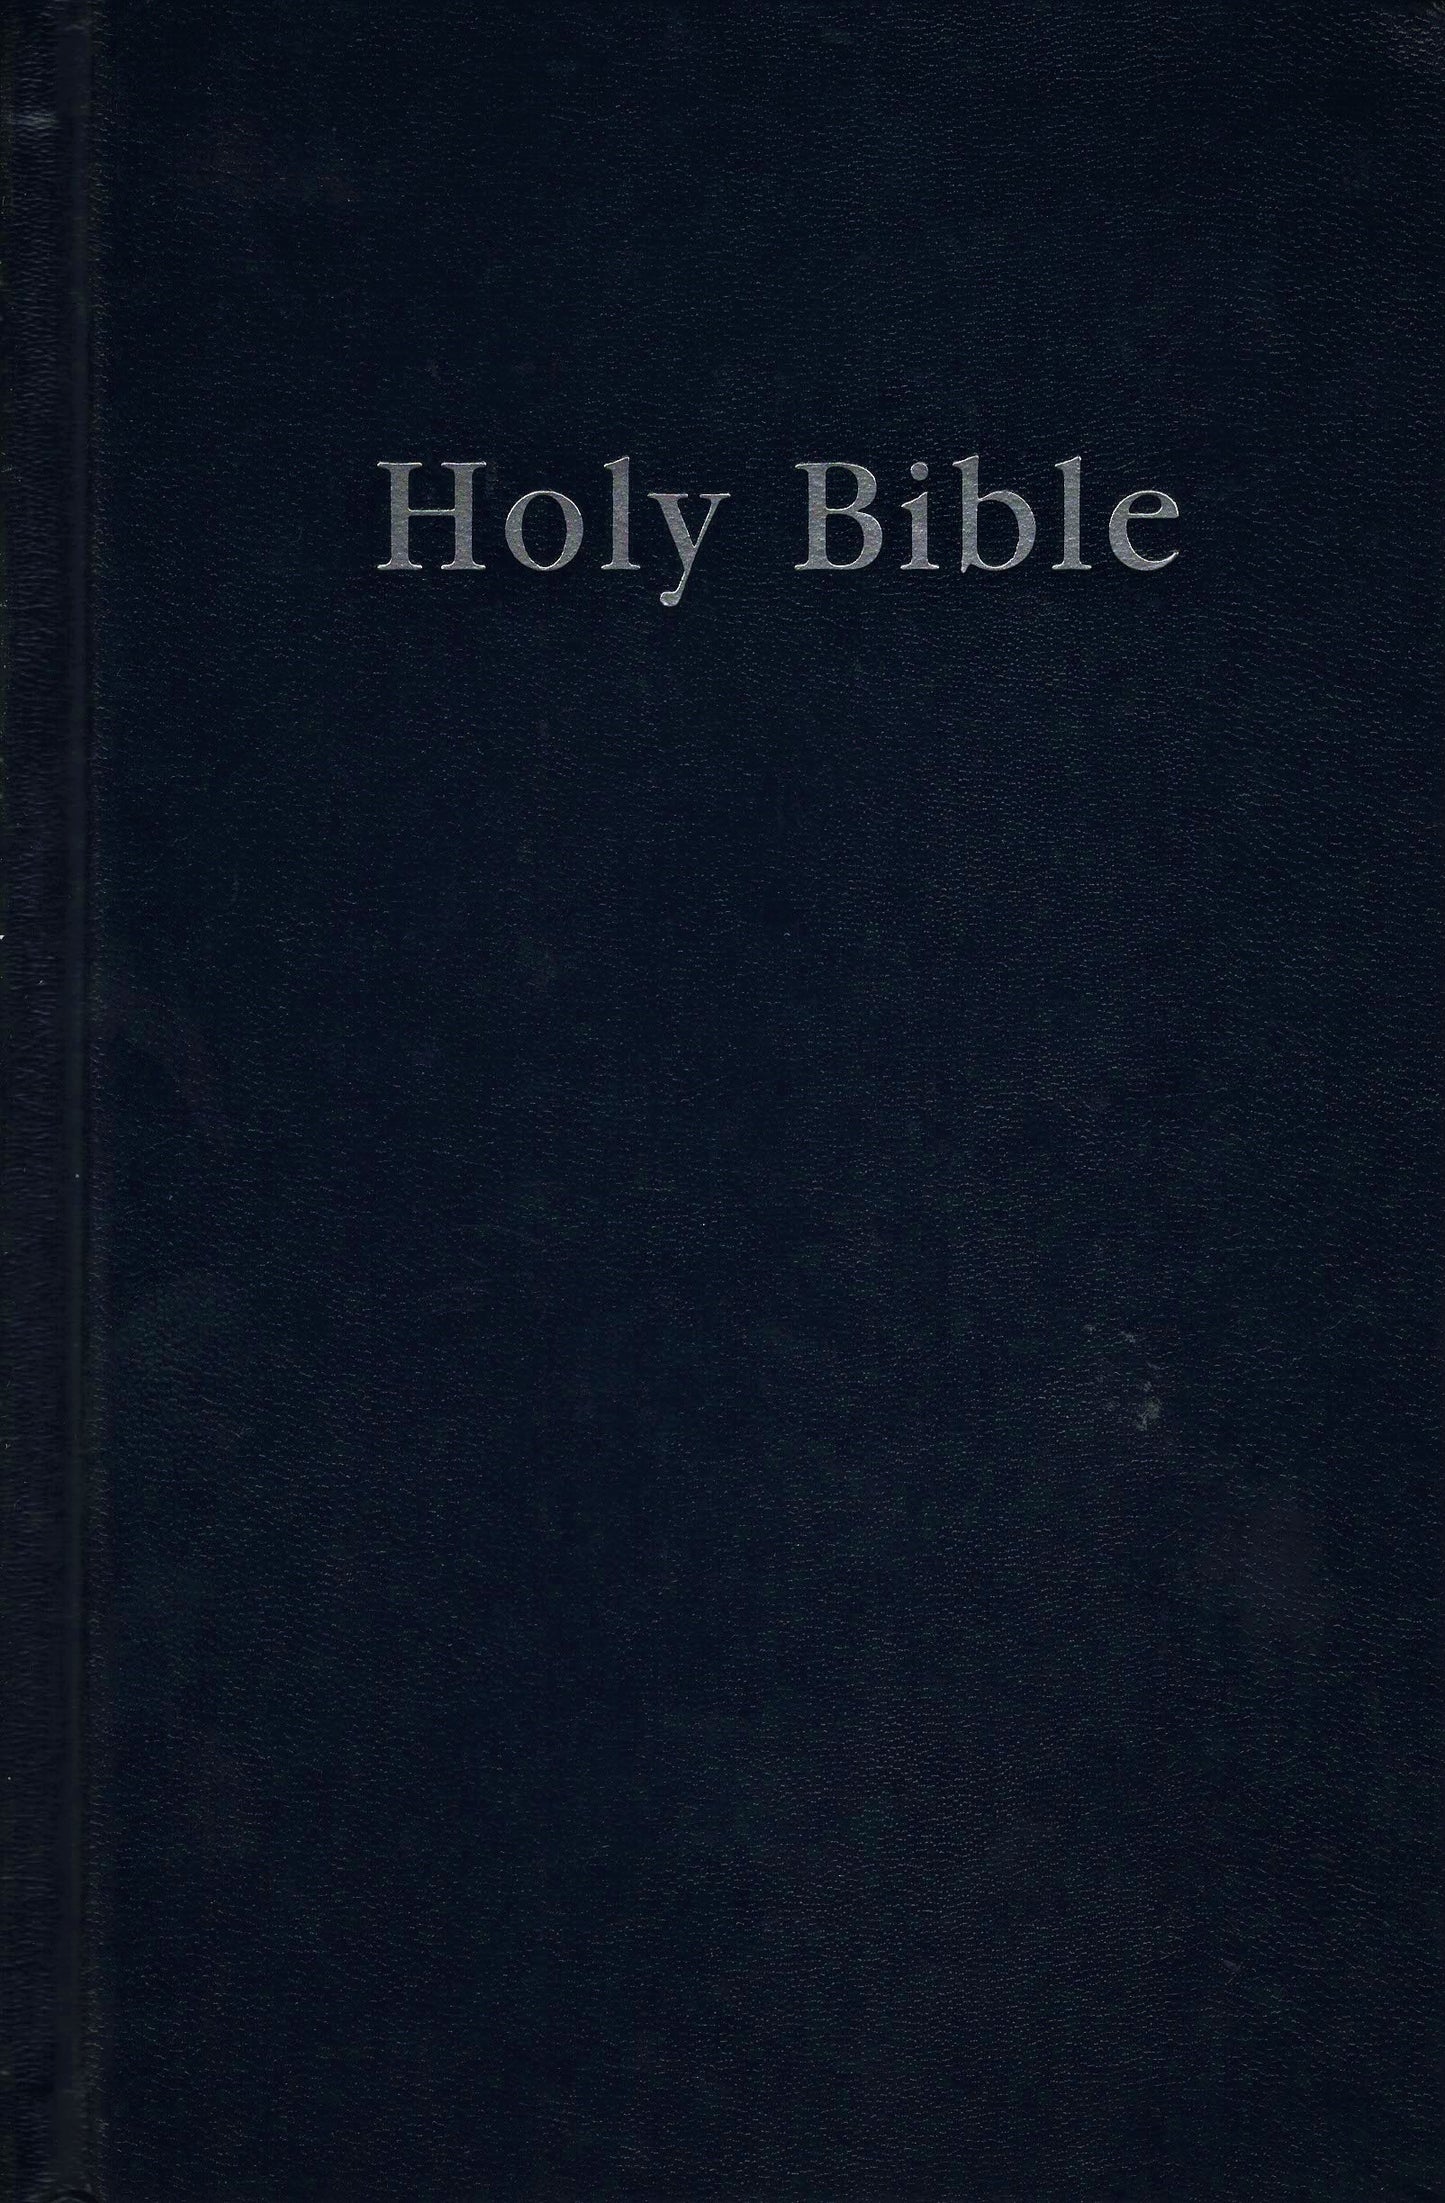 Foundation Publications Inc. NASB Text Edition Bible - Hardcover